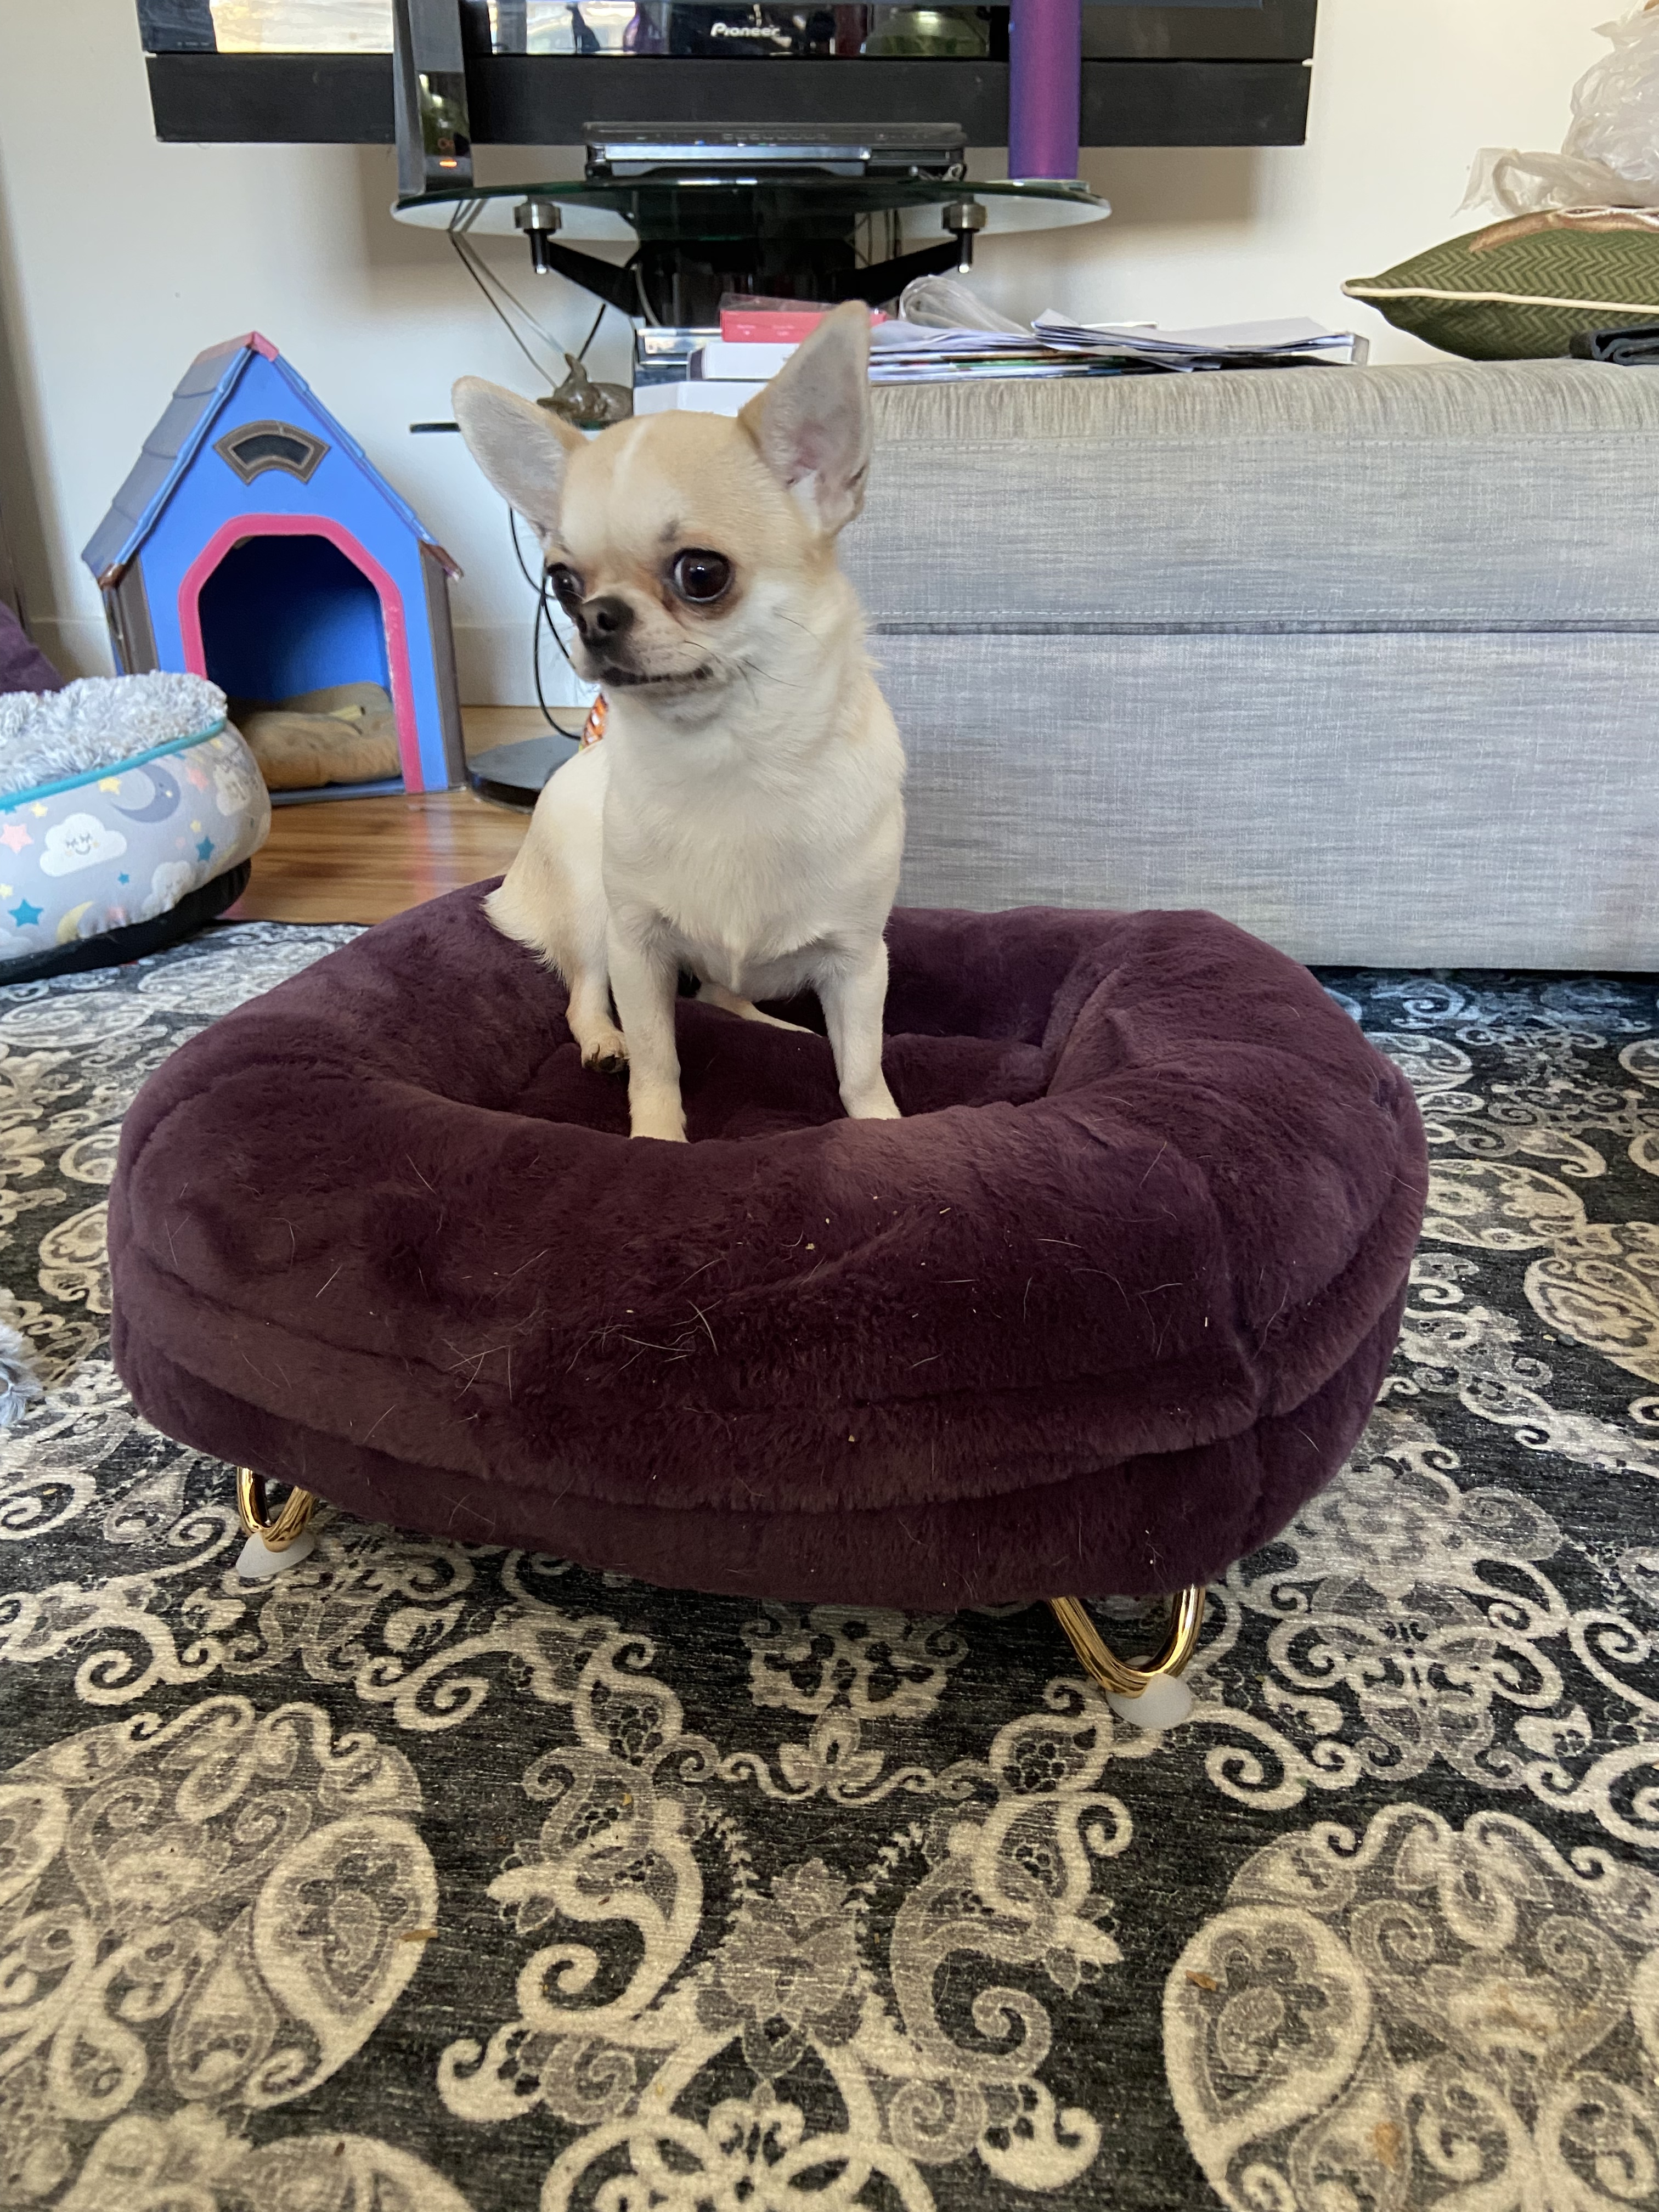 A chihuahua sitting on his purple donut shaped bed